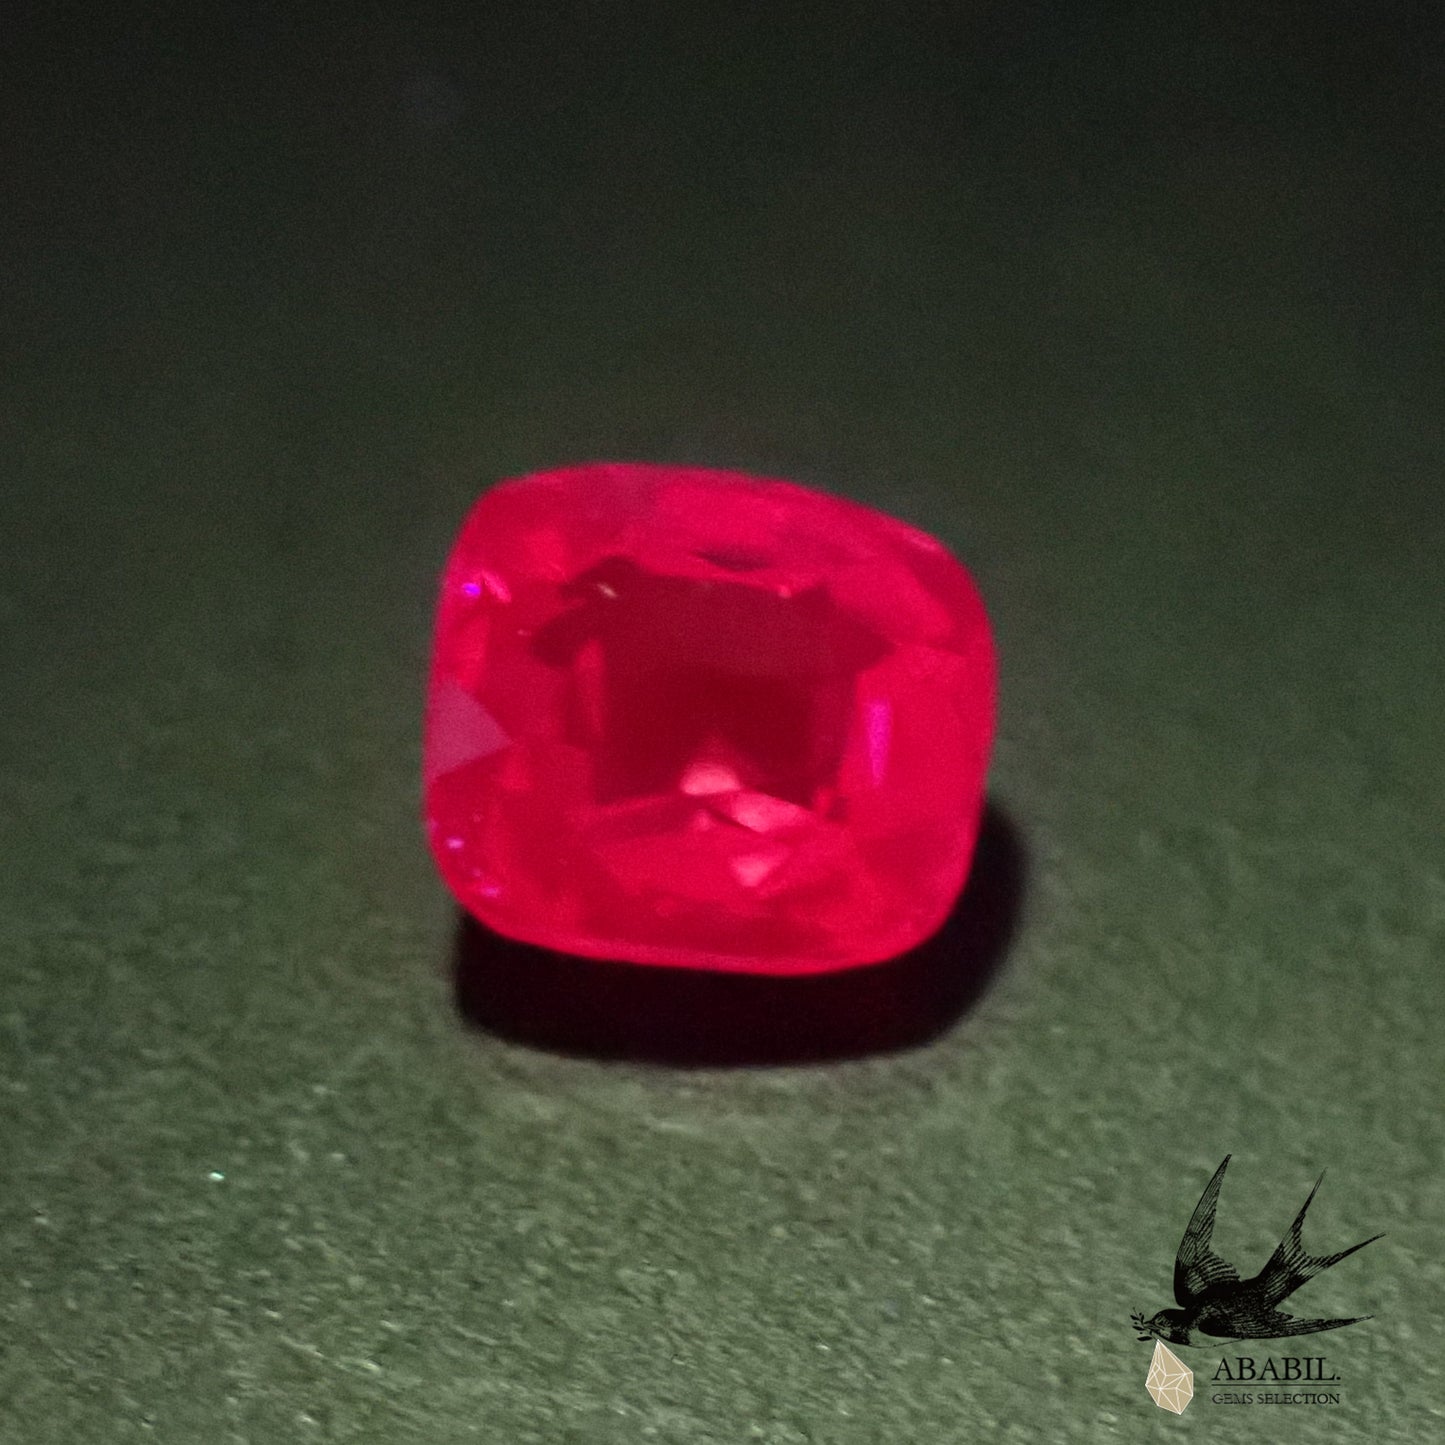 Natural red spinel 0.143ct [Burma] Specializing in gorgeous, fluorescence 